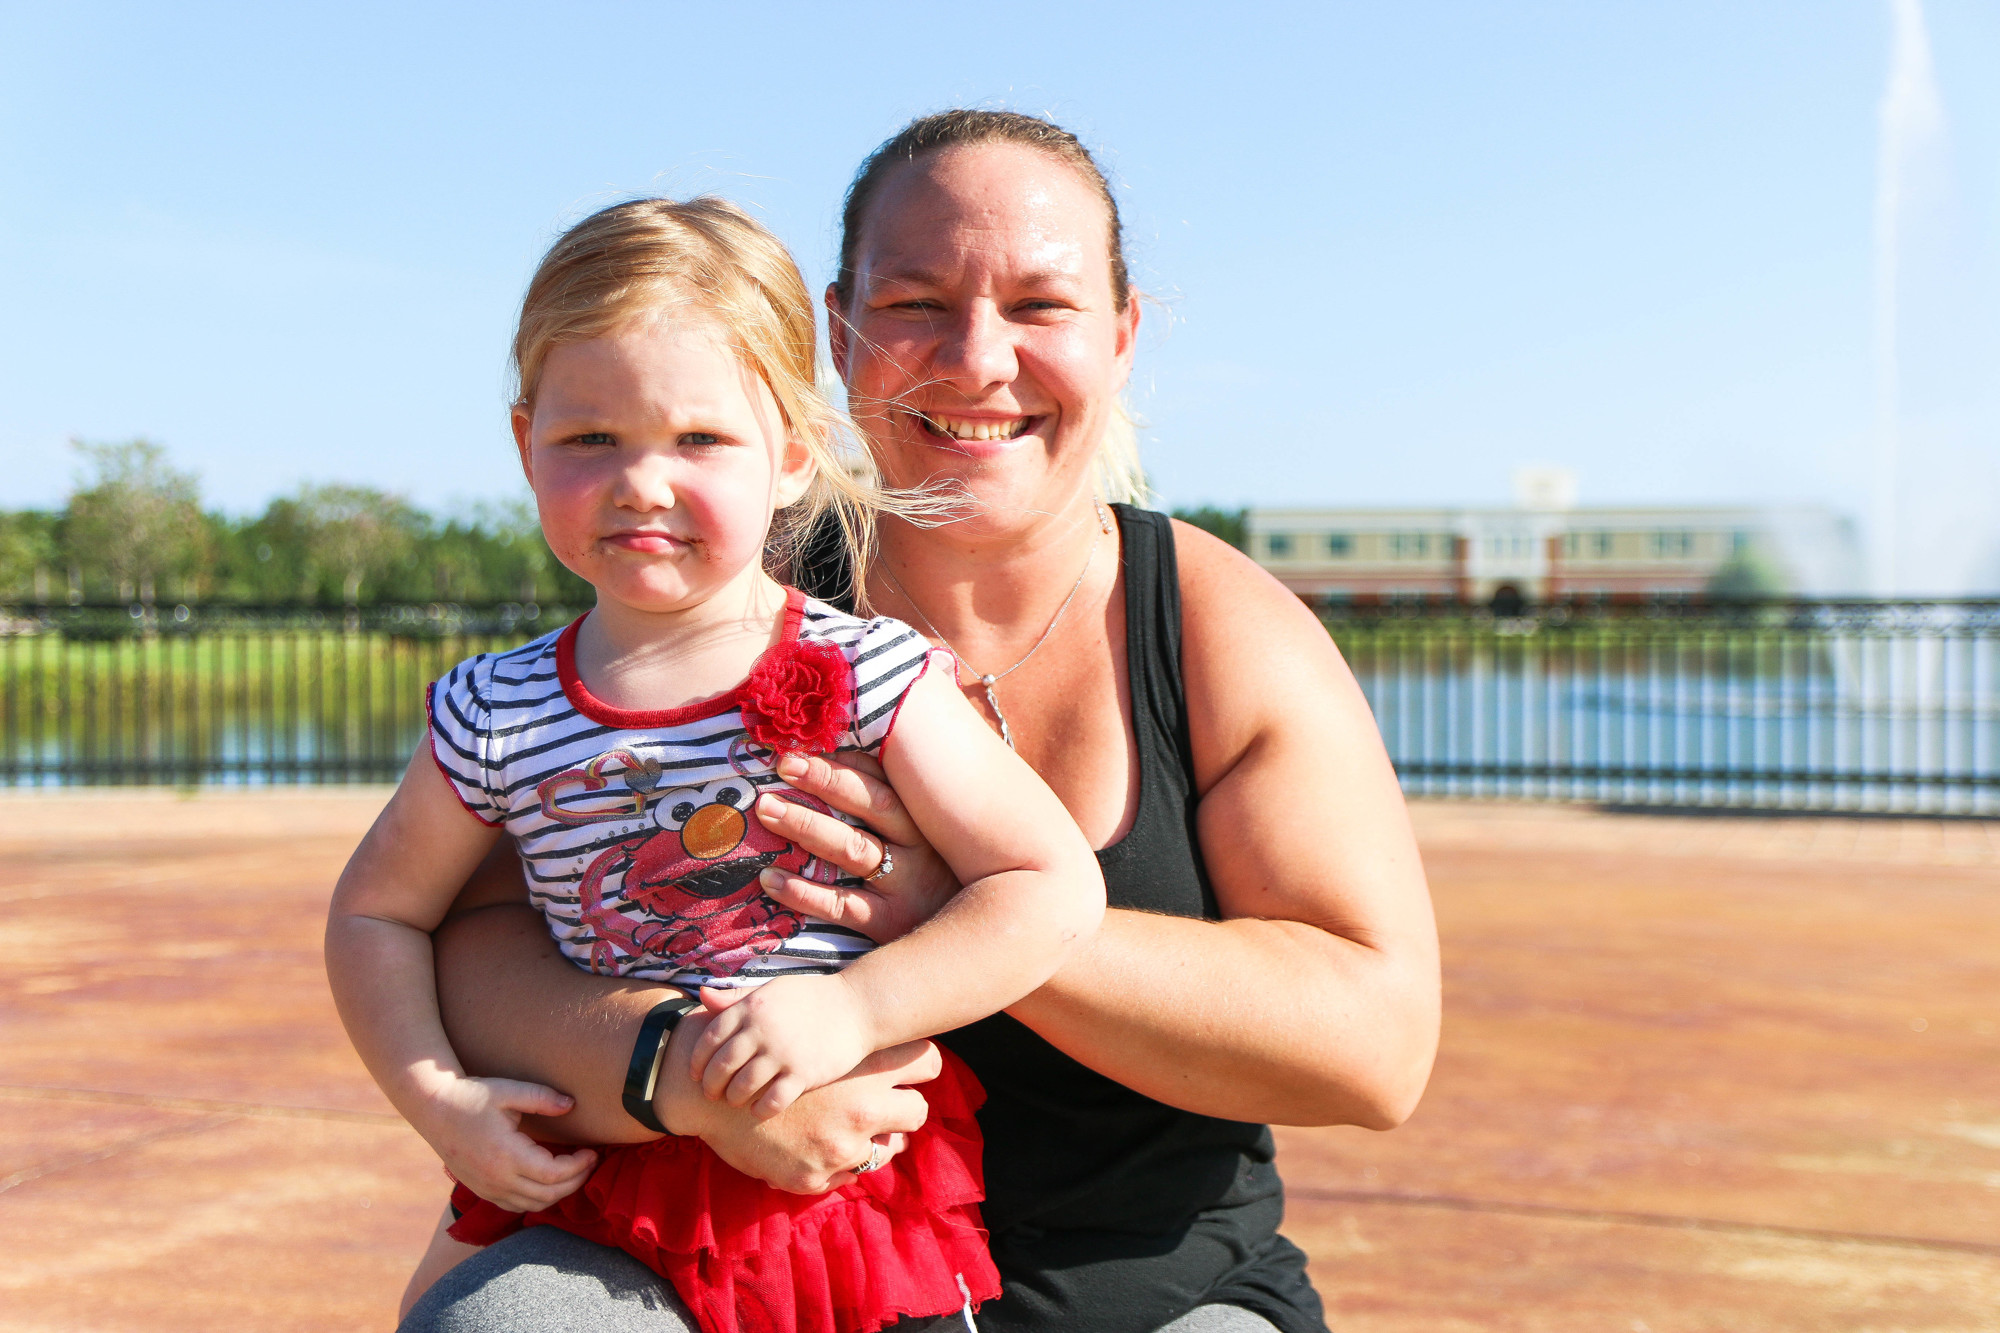 Fit Camp instructor Amanda Greenslade poses with her 3-year-old daughter, Emma. Photo by Paige Wilson